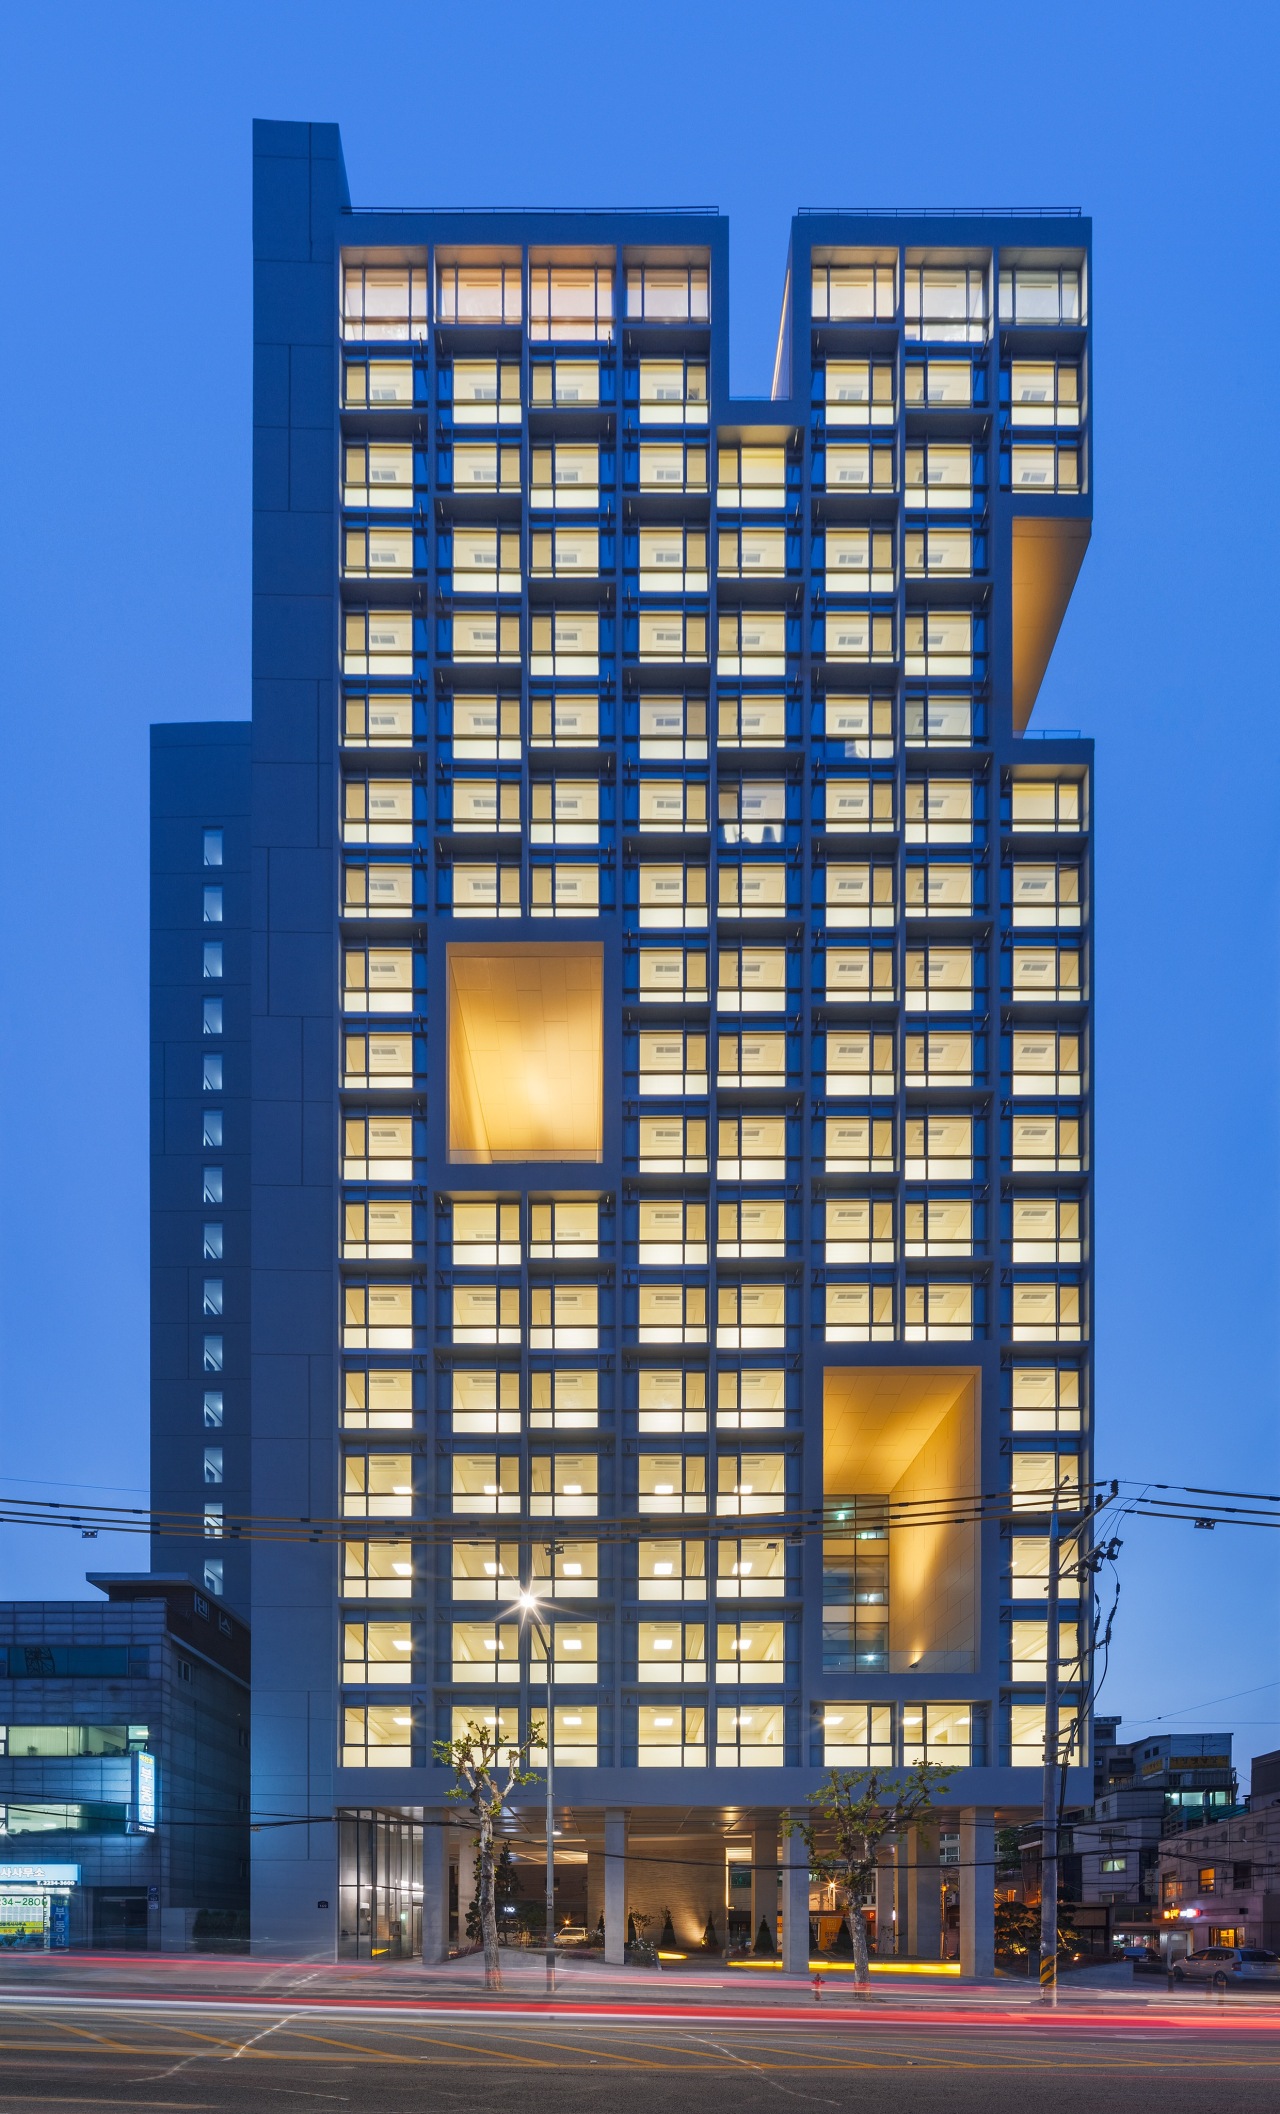 High-rise apartment and retail block Duo302 in Hwanghak-dong, central Seoul (Shin Kyung-sub) 